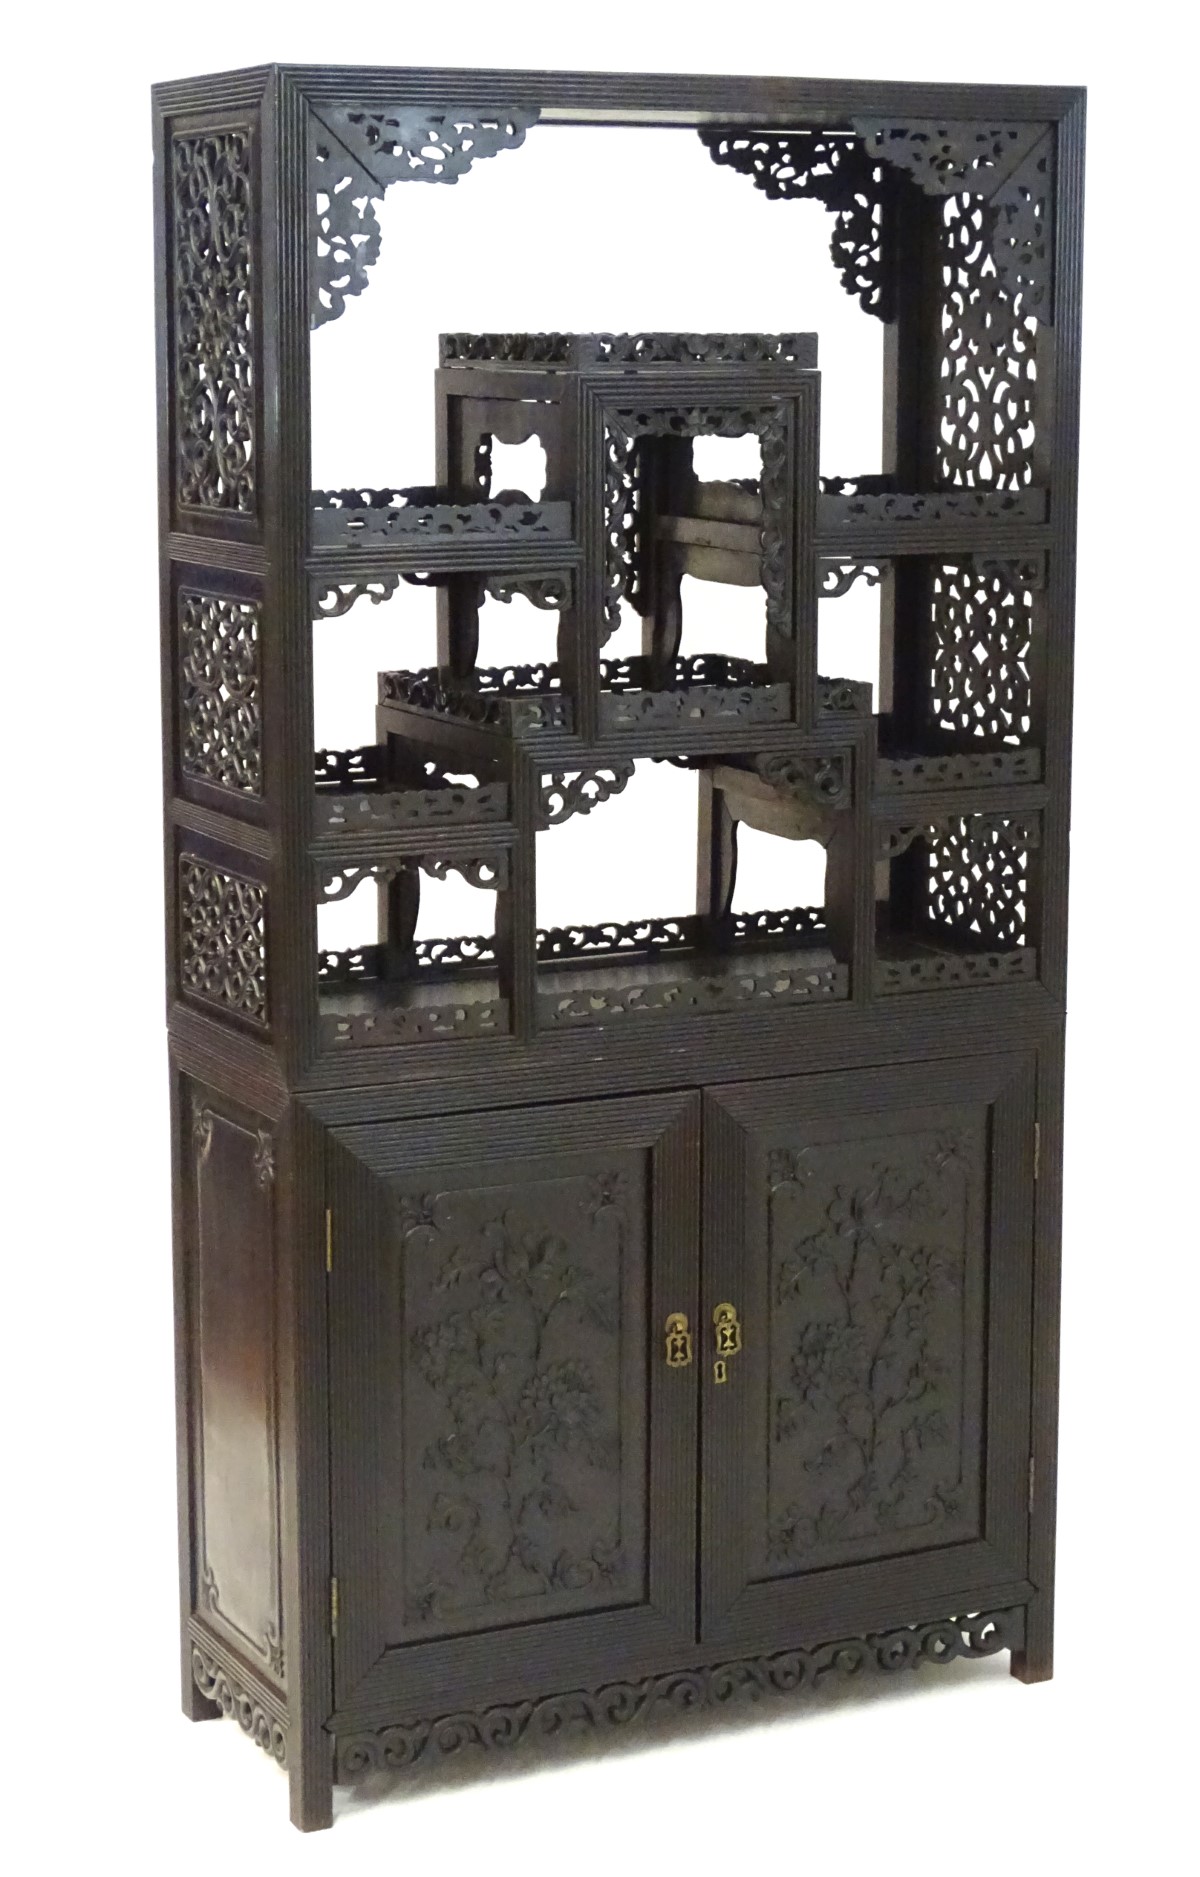 A late 19thC / early 20thC Chinese hardwood cabinet with open display shelves resting on a cupboard - Image 6 of 10